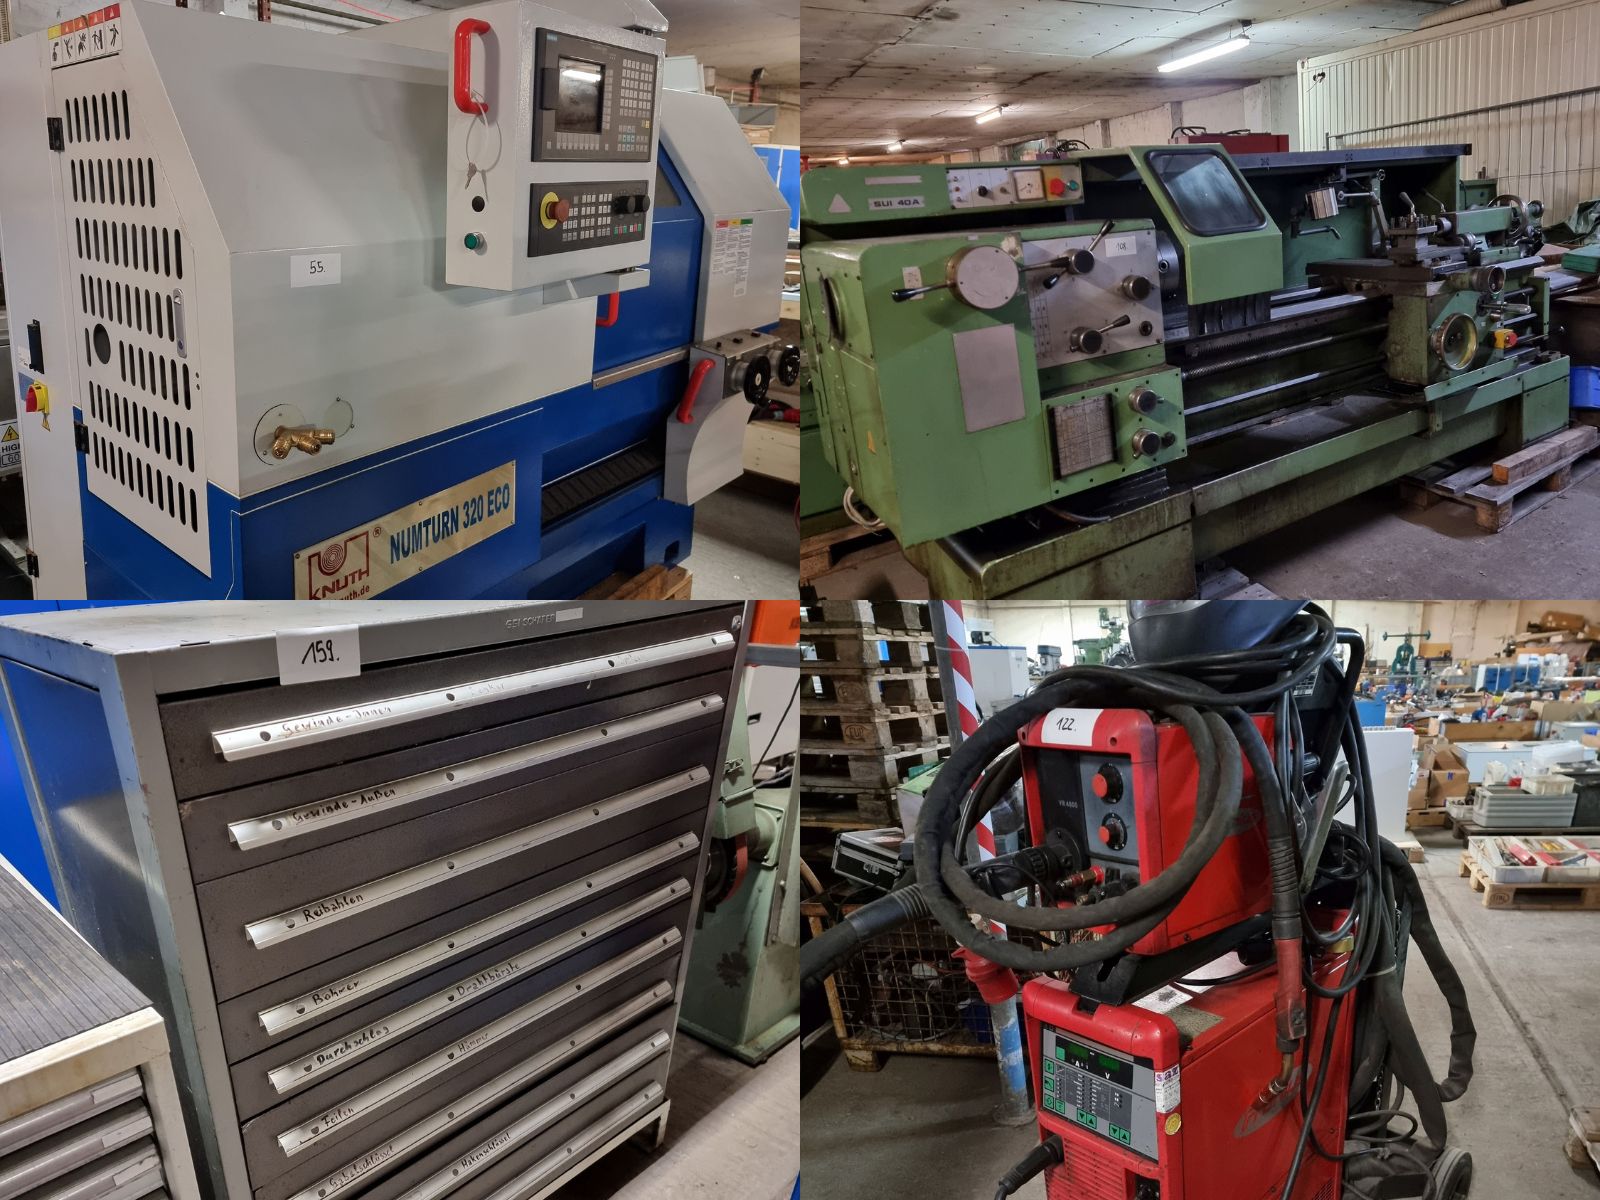 Machines and tools for metalworking | Large stock of hydraulic and electrical equipment